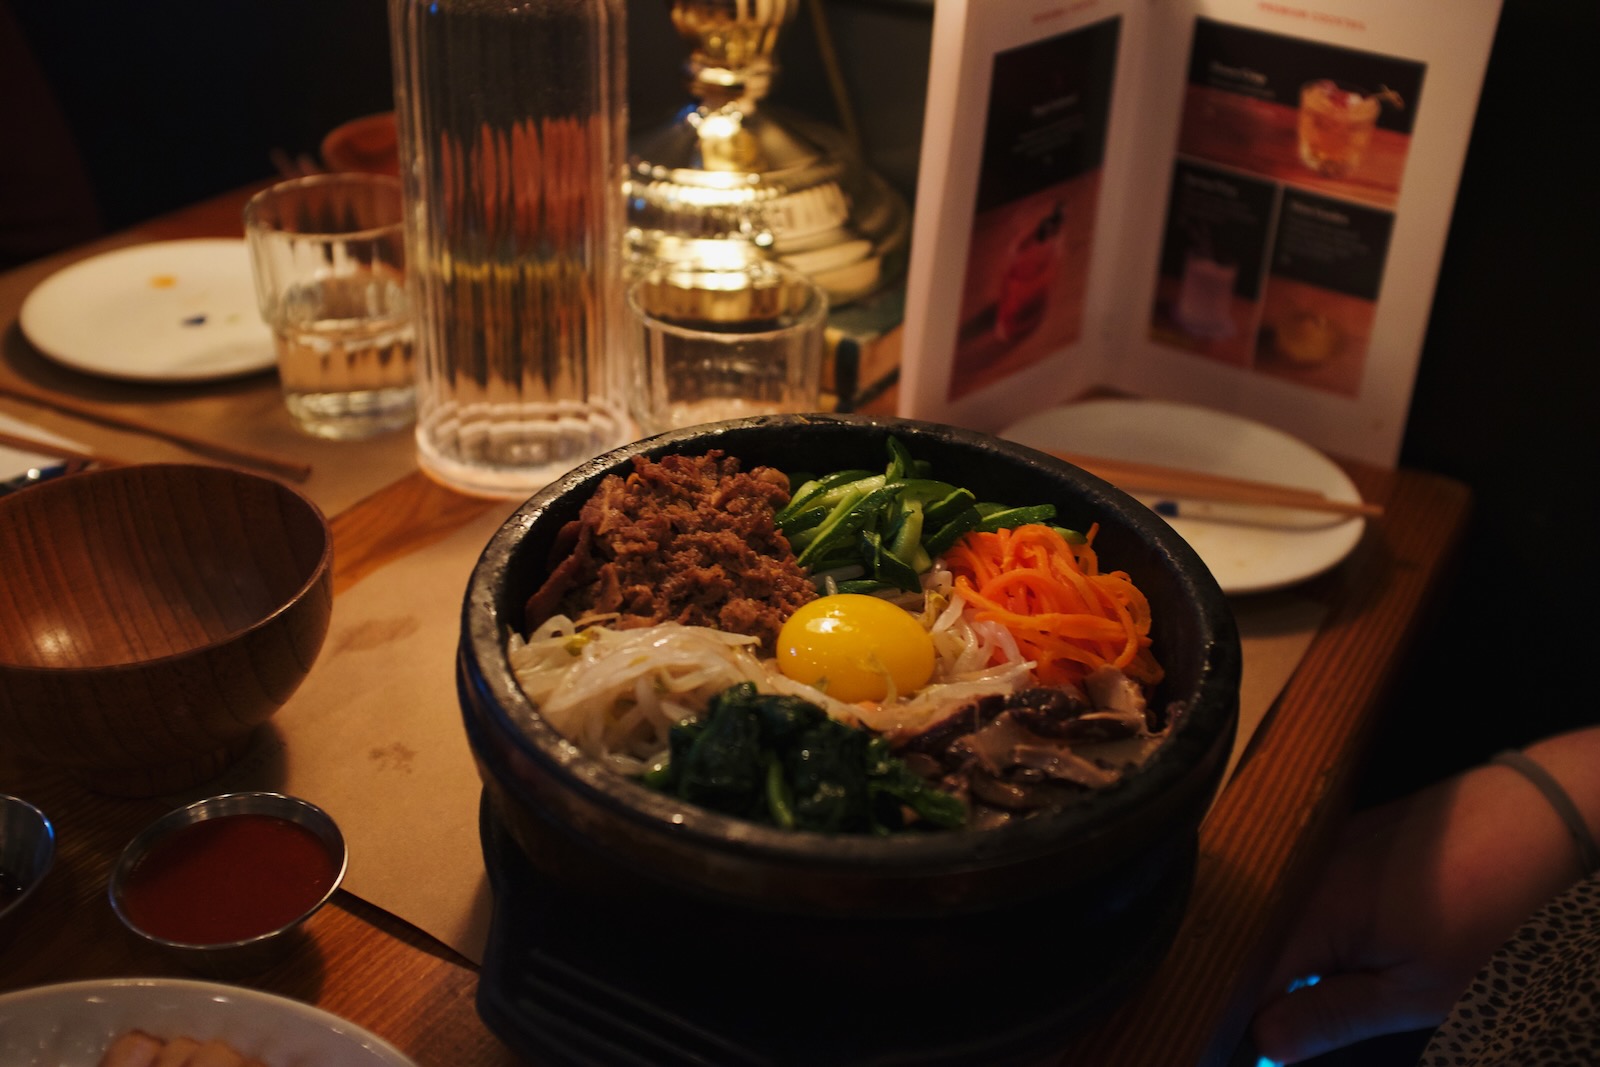 A bowl of bibimbap, with a single egg yolk perched perfectly in the center.